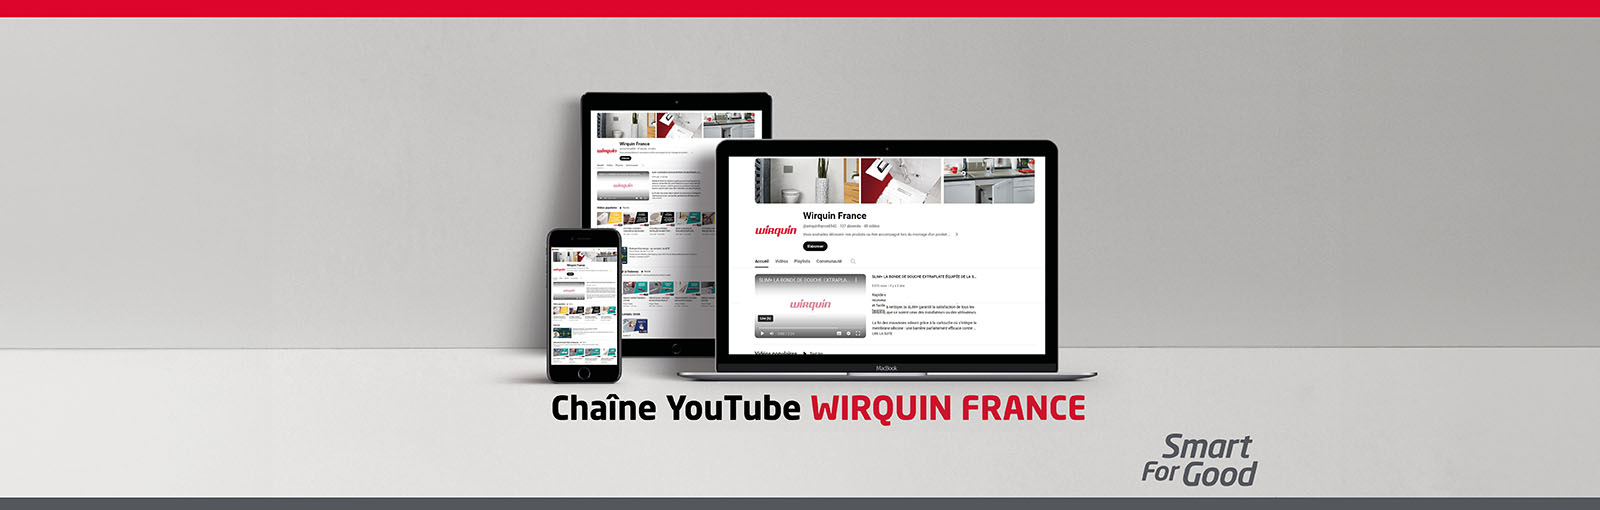 youtube_wirquin_france